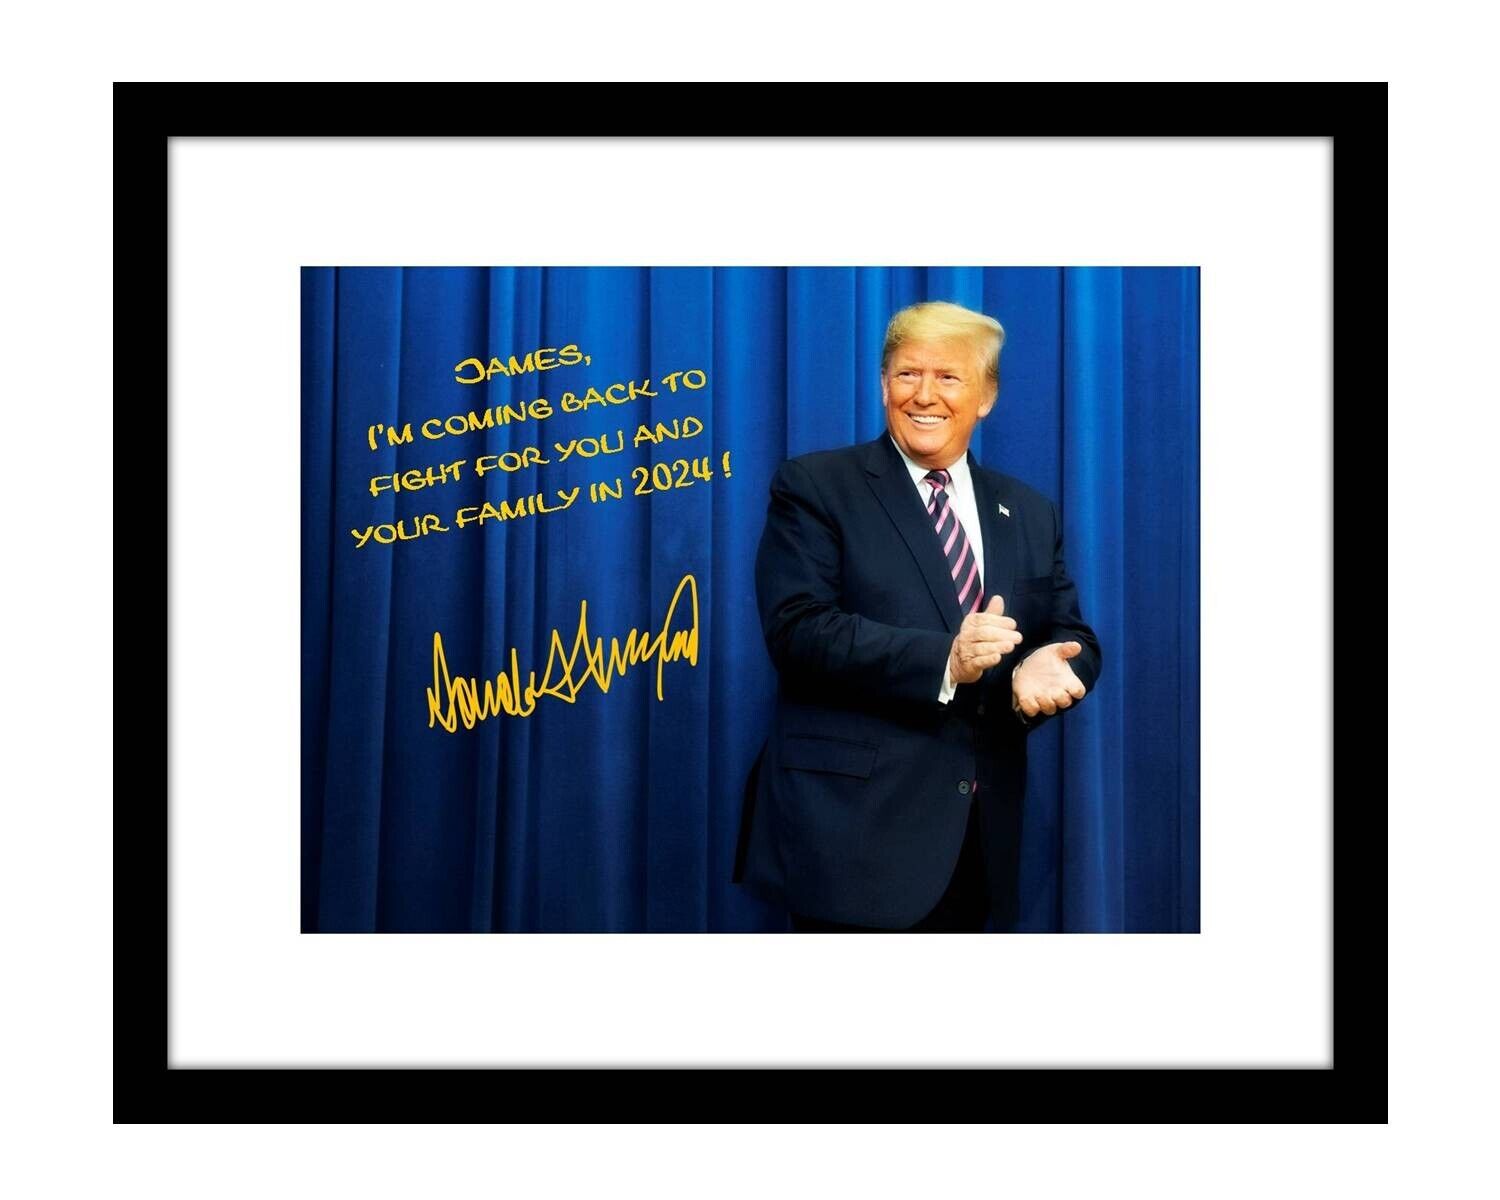 Donald Trump 8x10 Signed photo Personalized to YOUR NAME 2024 save America gop